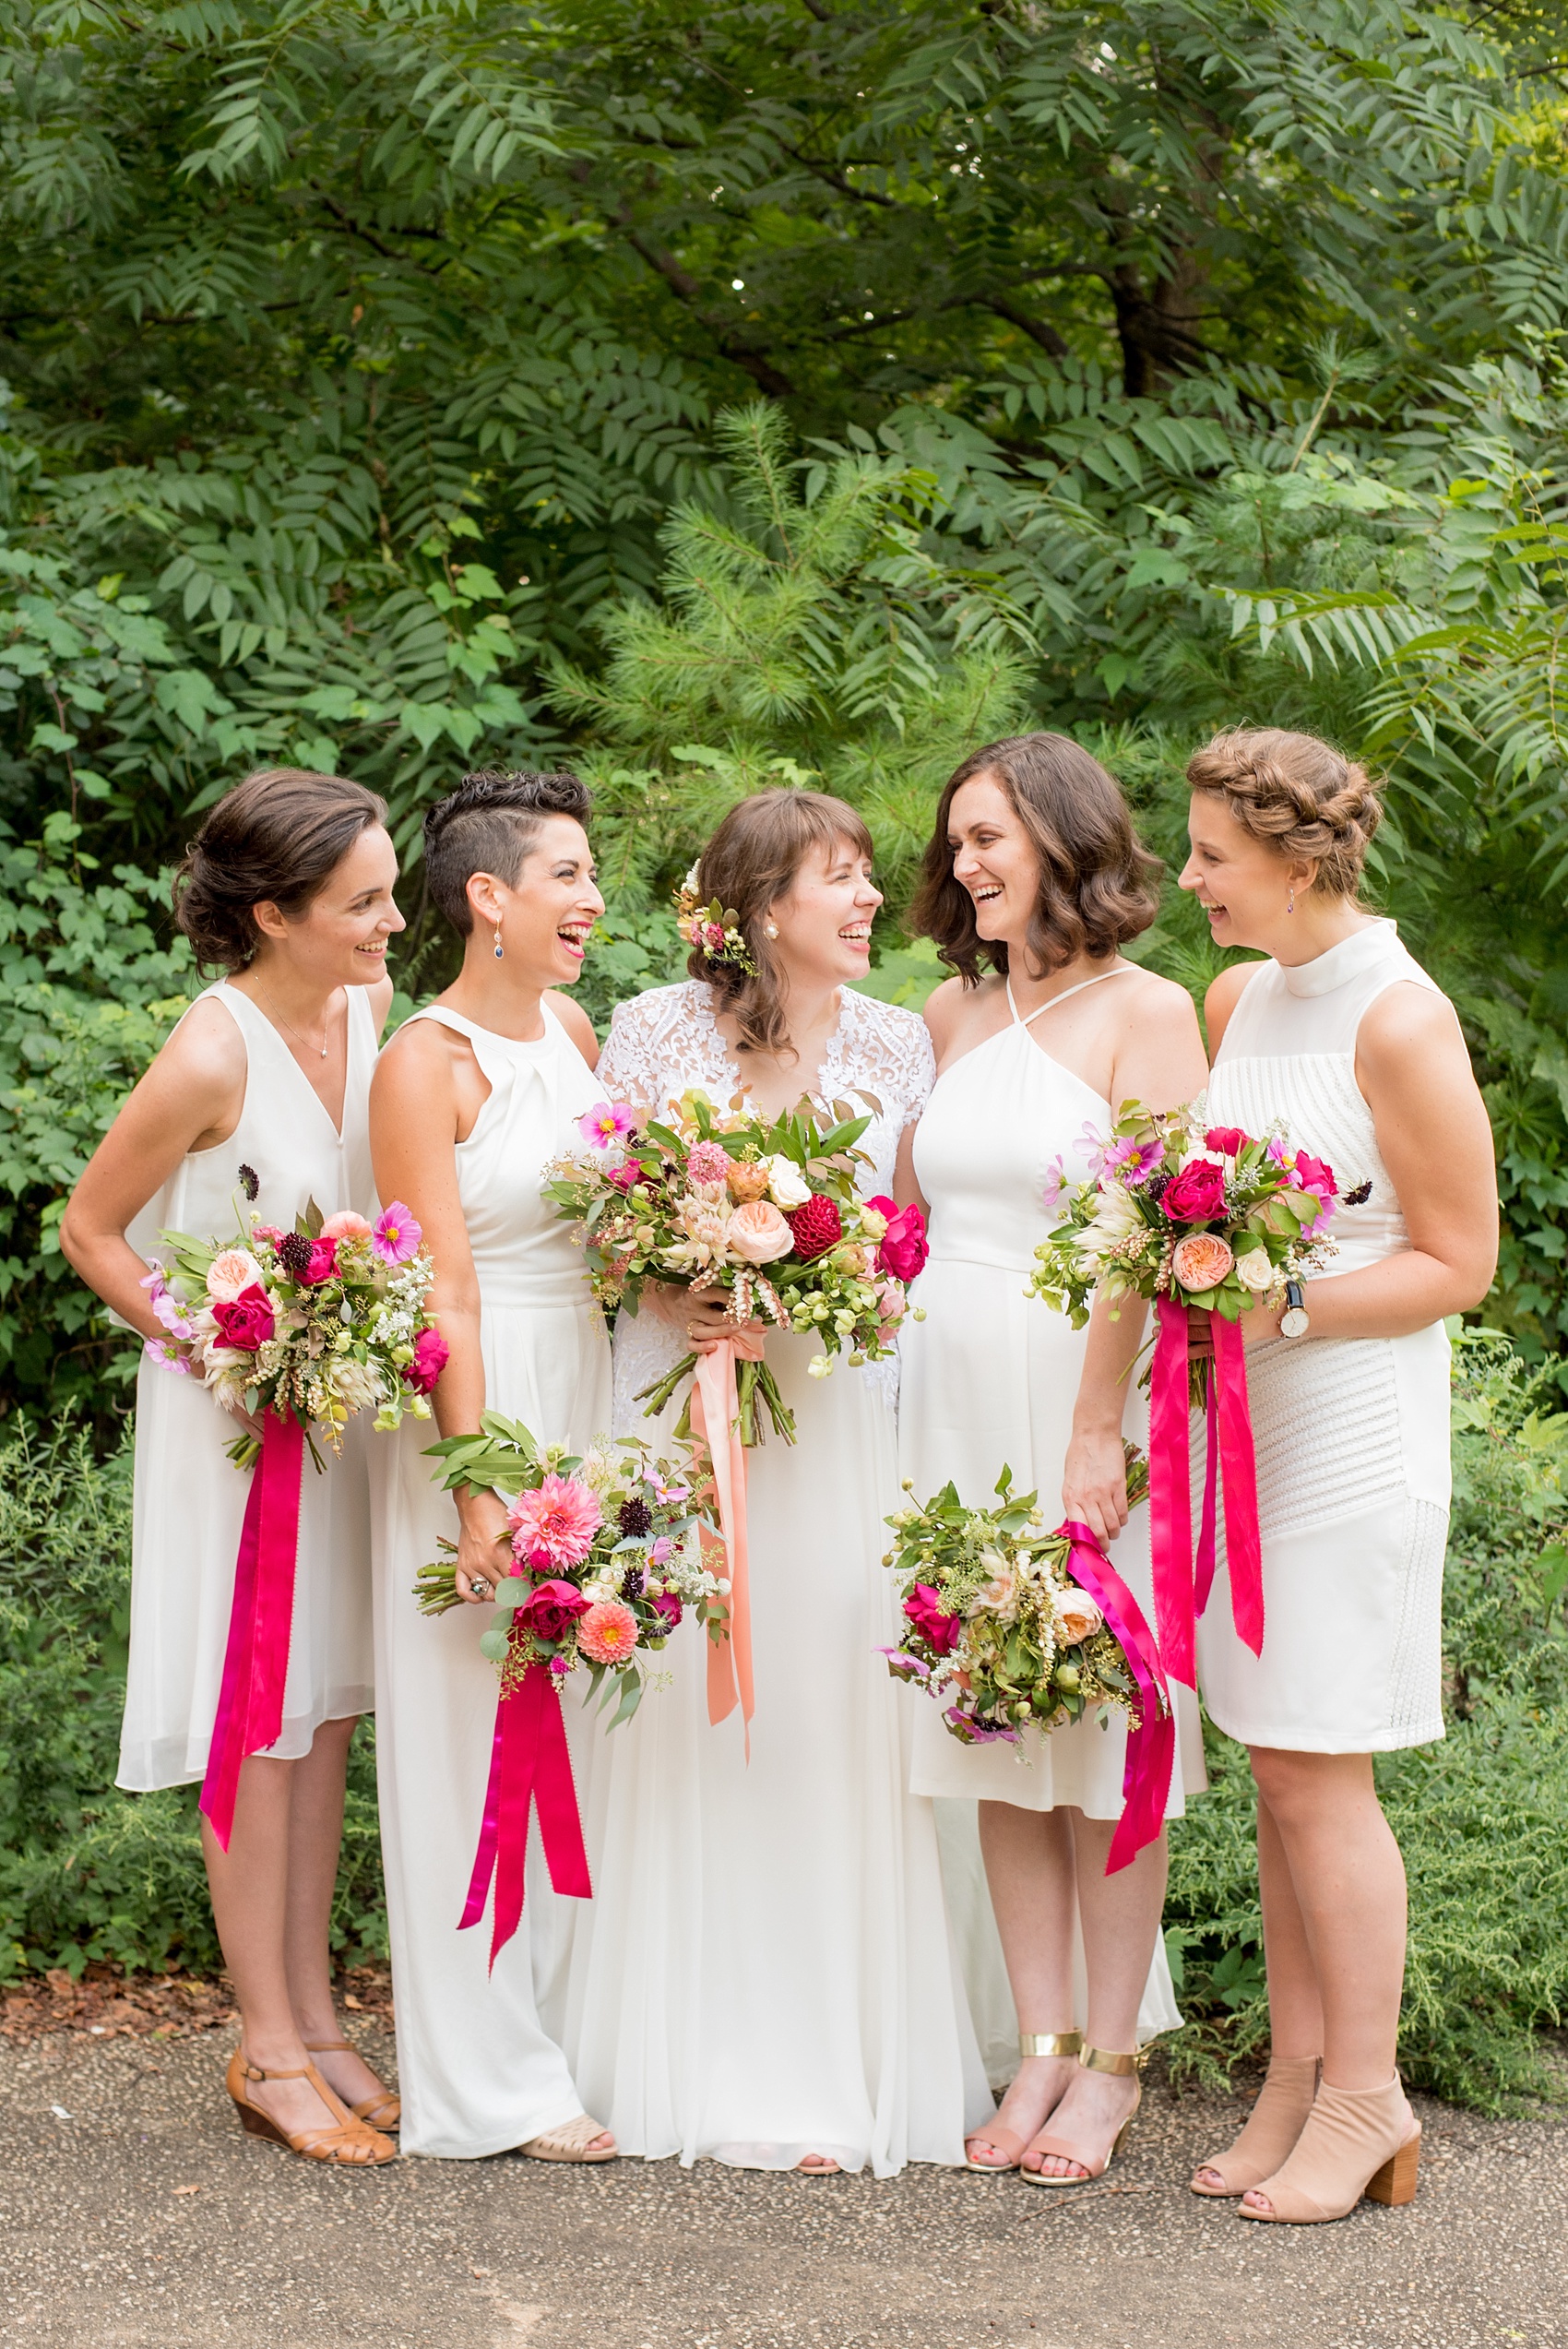 Mikkel Paige Photography photos from a wedding at Prospect Park Boathouse in Brooklyn, NY. Bride in a Reem Acra gown and bridesmaids in white with bouquets tied with pink ribbon by Sachi Rose.